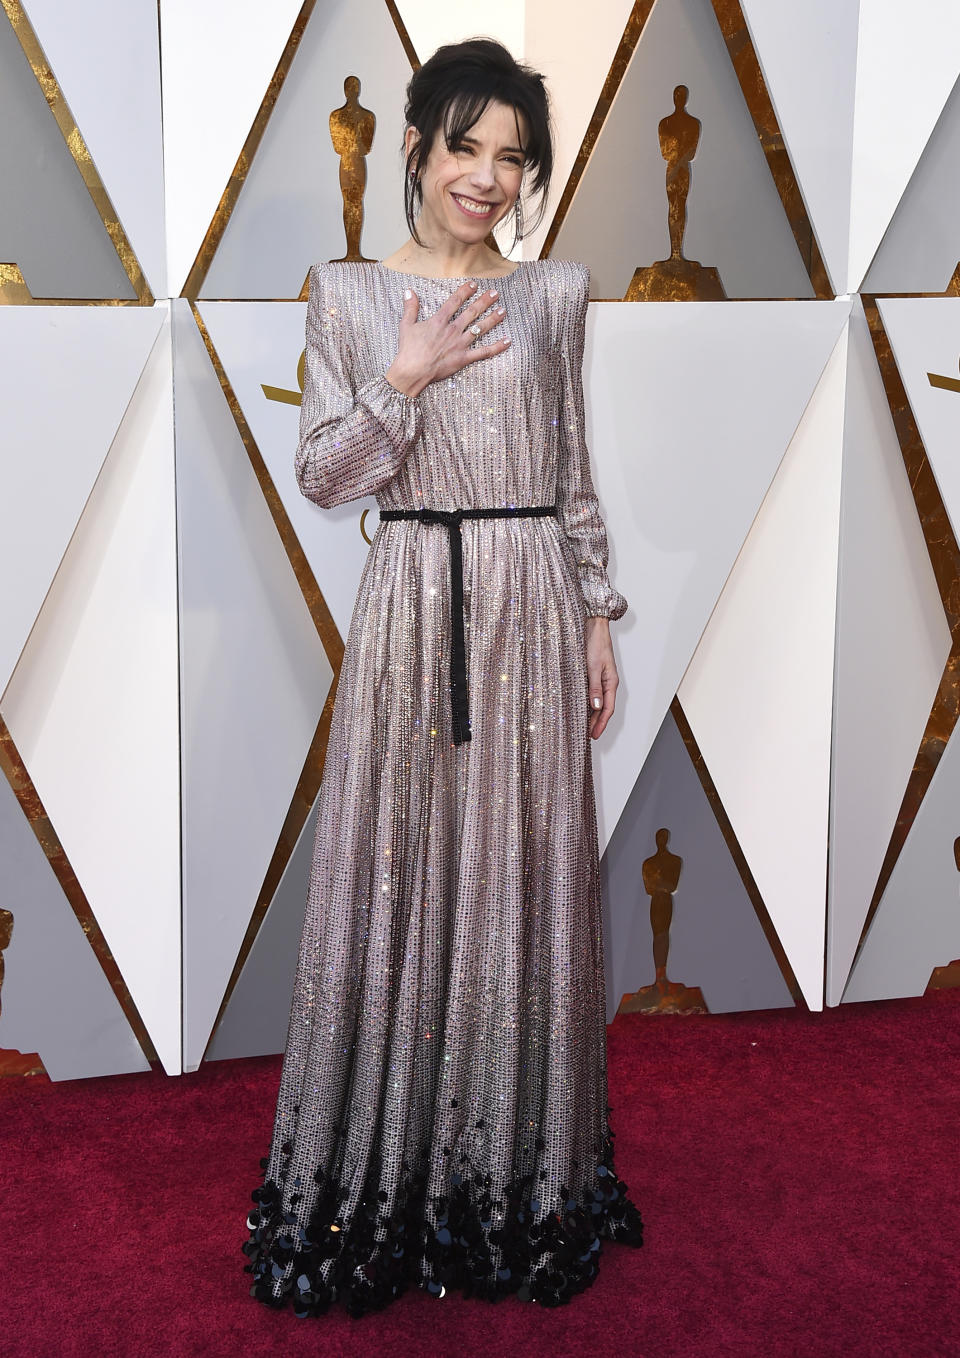 FILE - Sally Hawkins arrives at the Oscars on March 4, 2018, in Los Angeles. Hawkins turns 46 on April 27. (Photo by Jordan Strauss/Invision/AP, File)